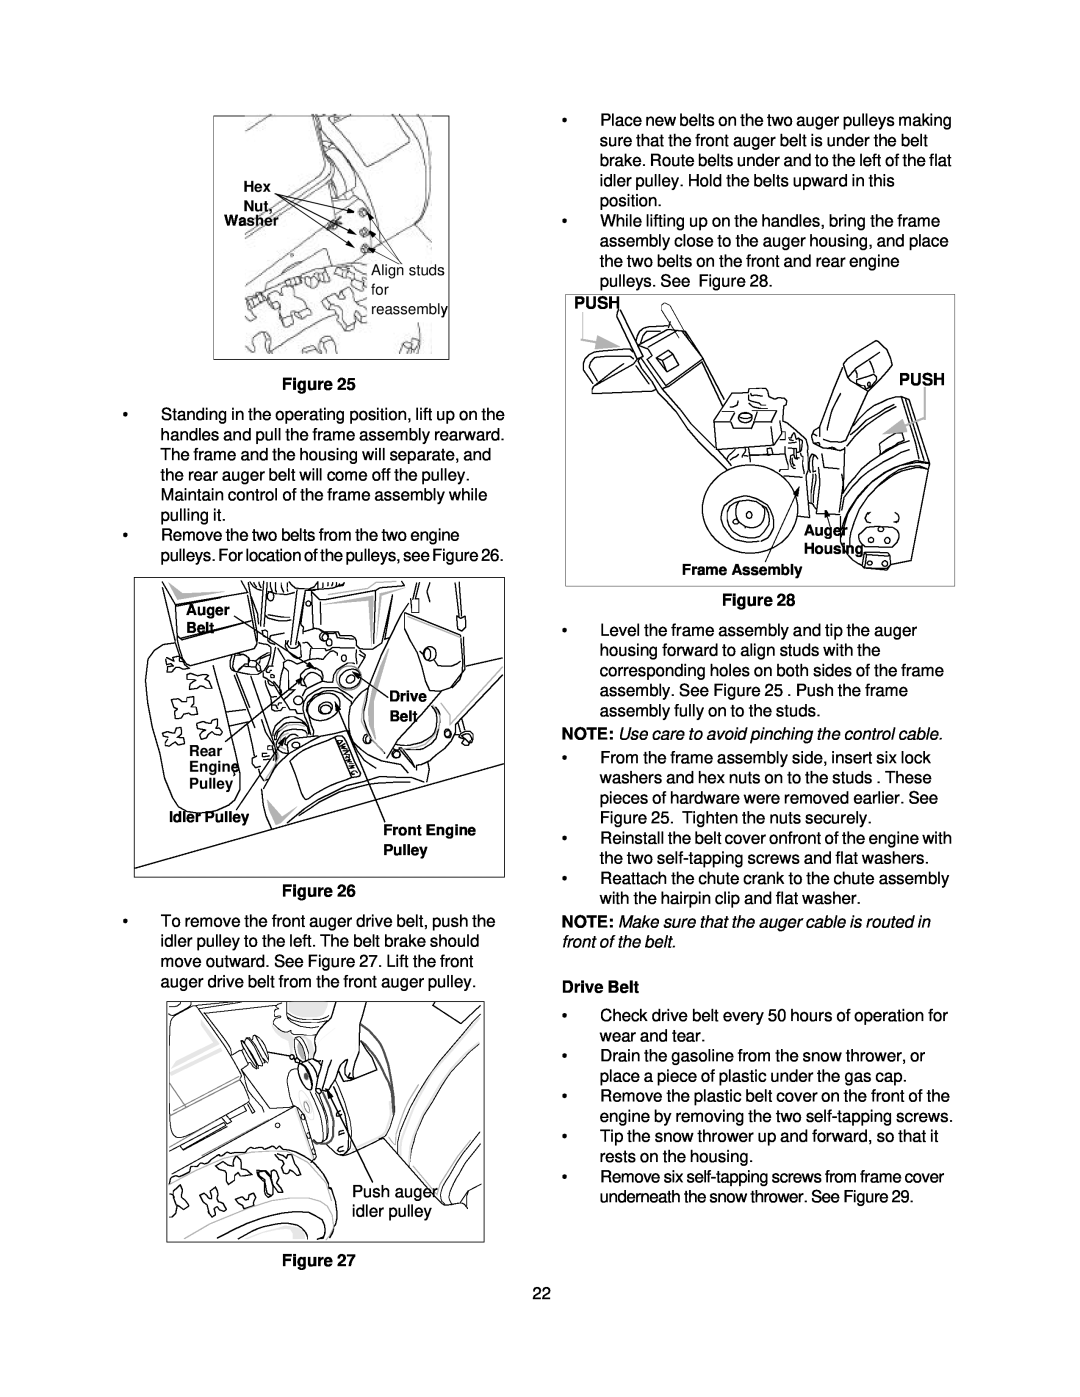 Sears 247.88852 owner manual Push, NOTE Use care to avoid pinching the control cable, Drive Belt 